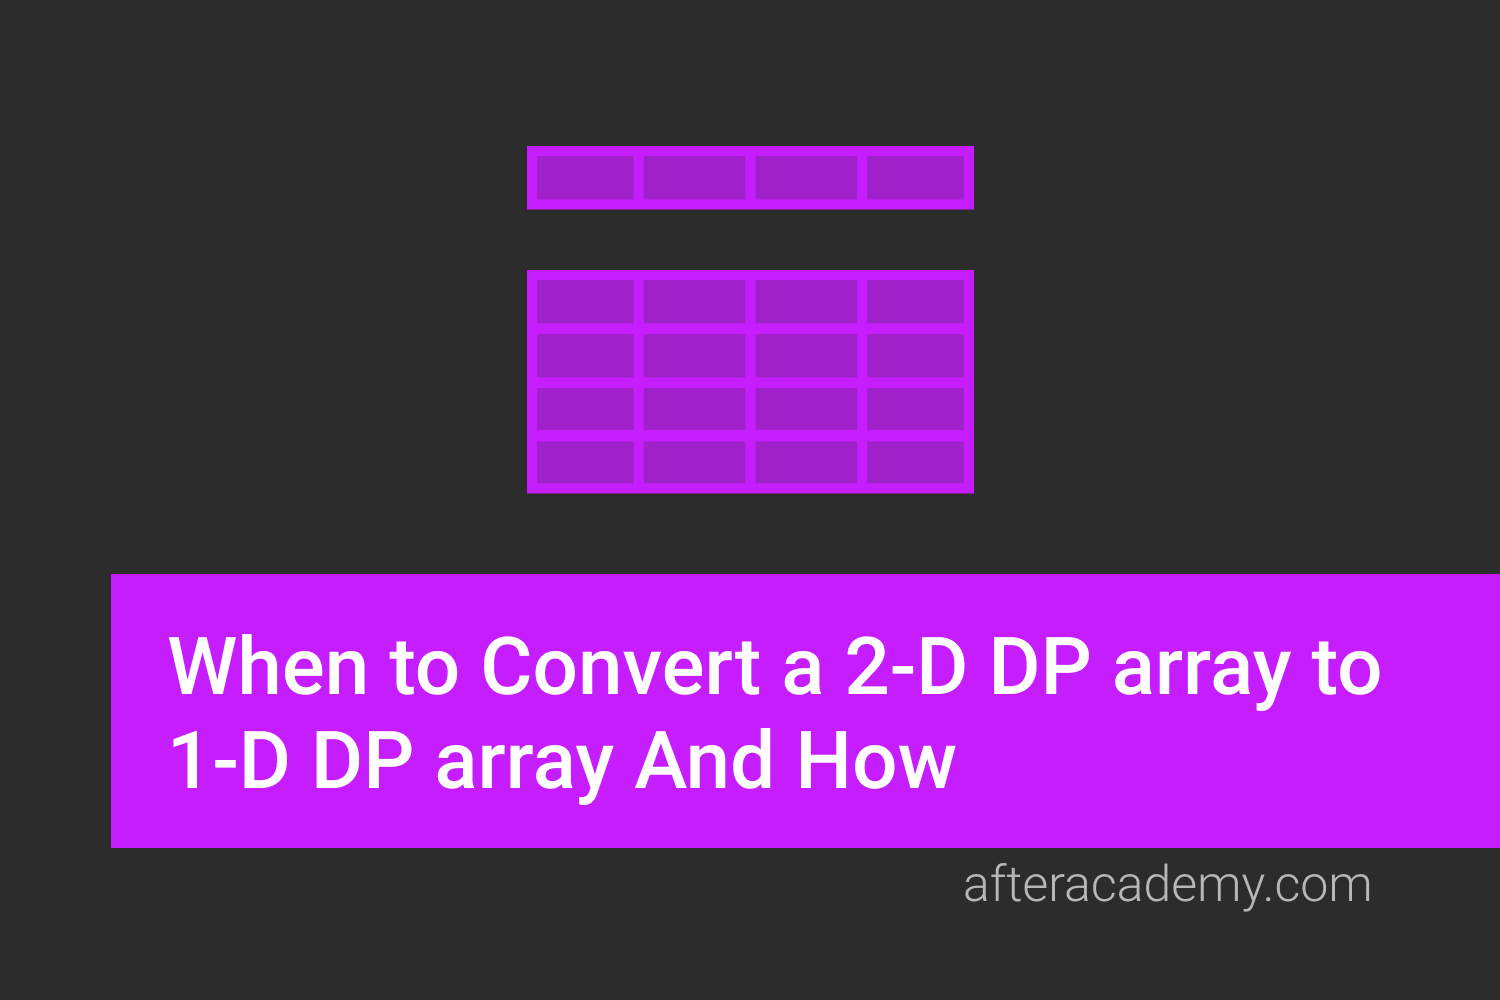 When to Convert a 2-D DP array to 1-D DP array And How?